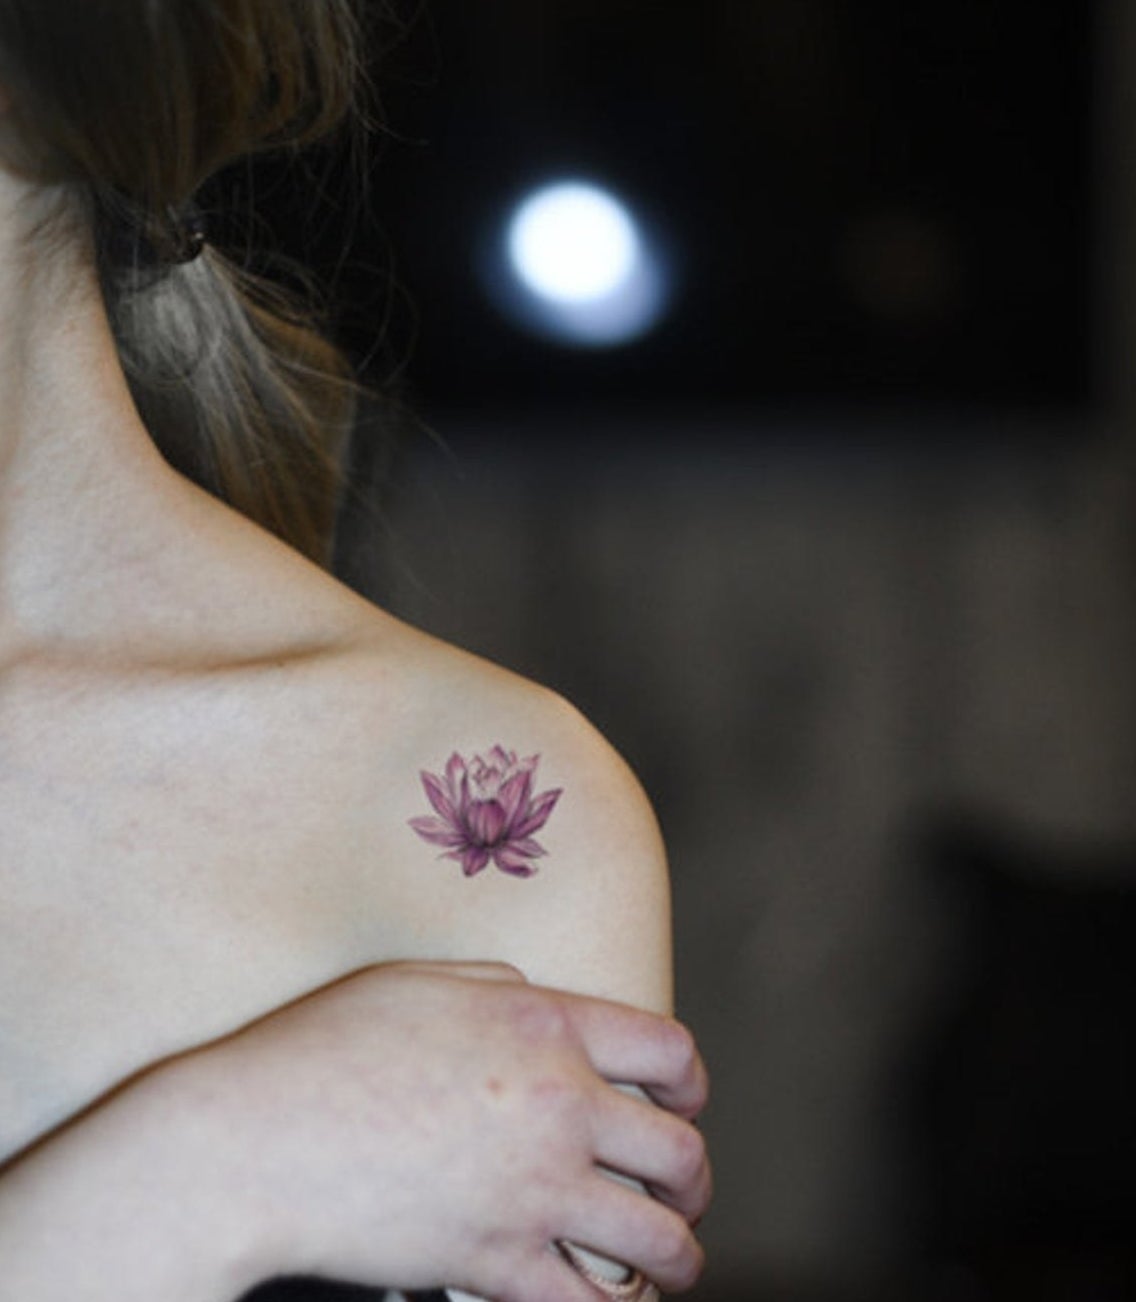 Model with a small purple lotus design on their shoulder